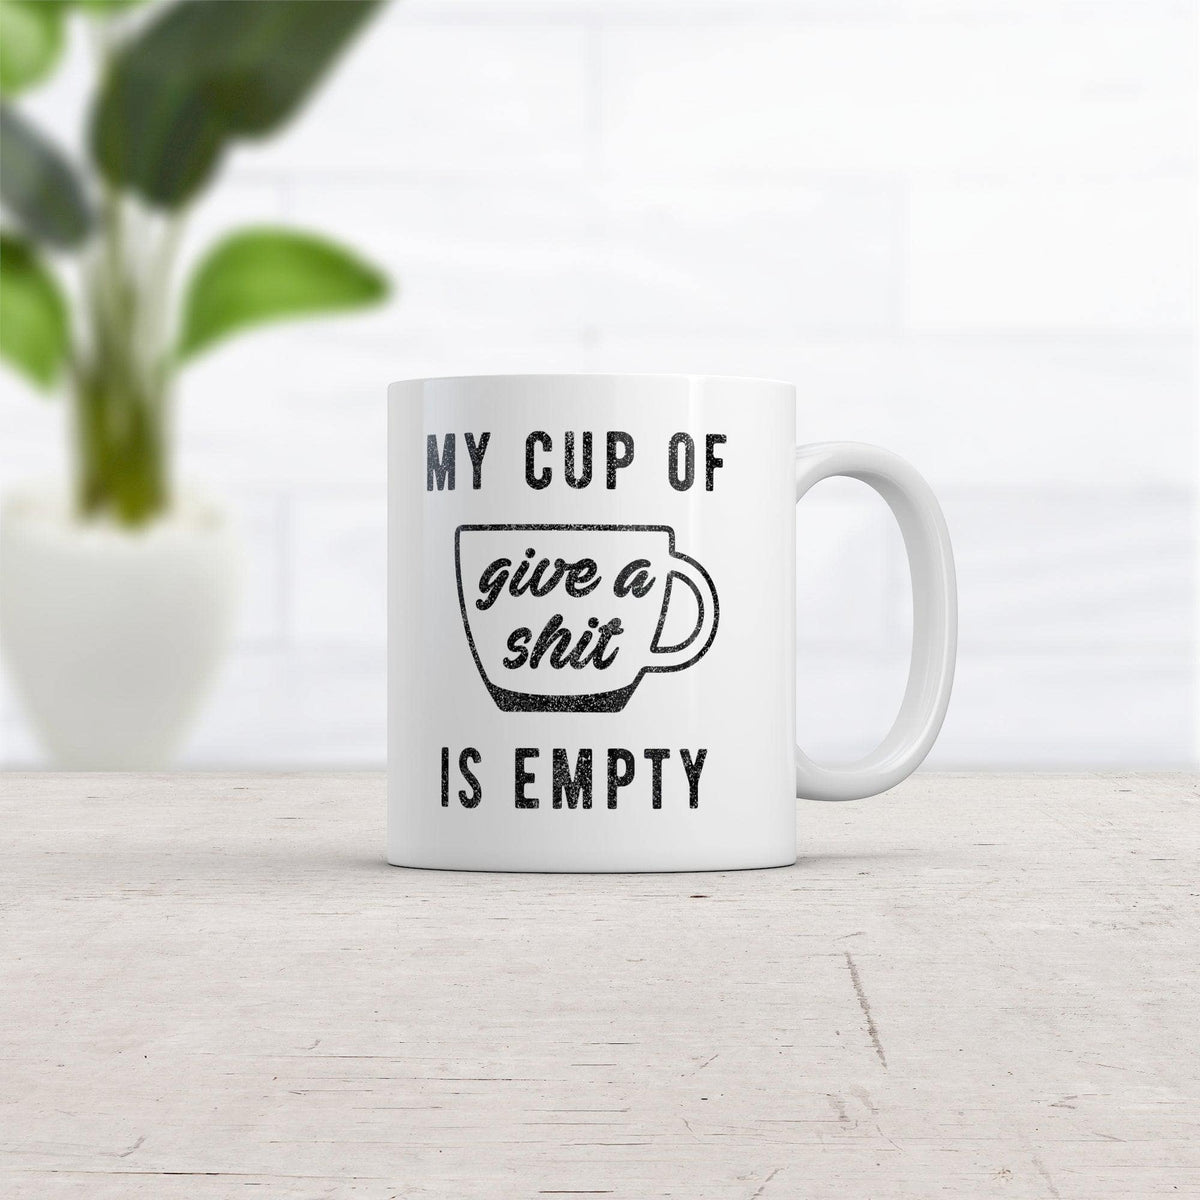 My Cup Of Give A Shit Is Empty Mug  -  Crazy Dog T-Shirts